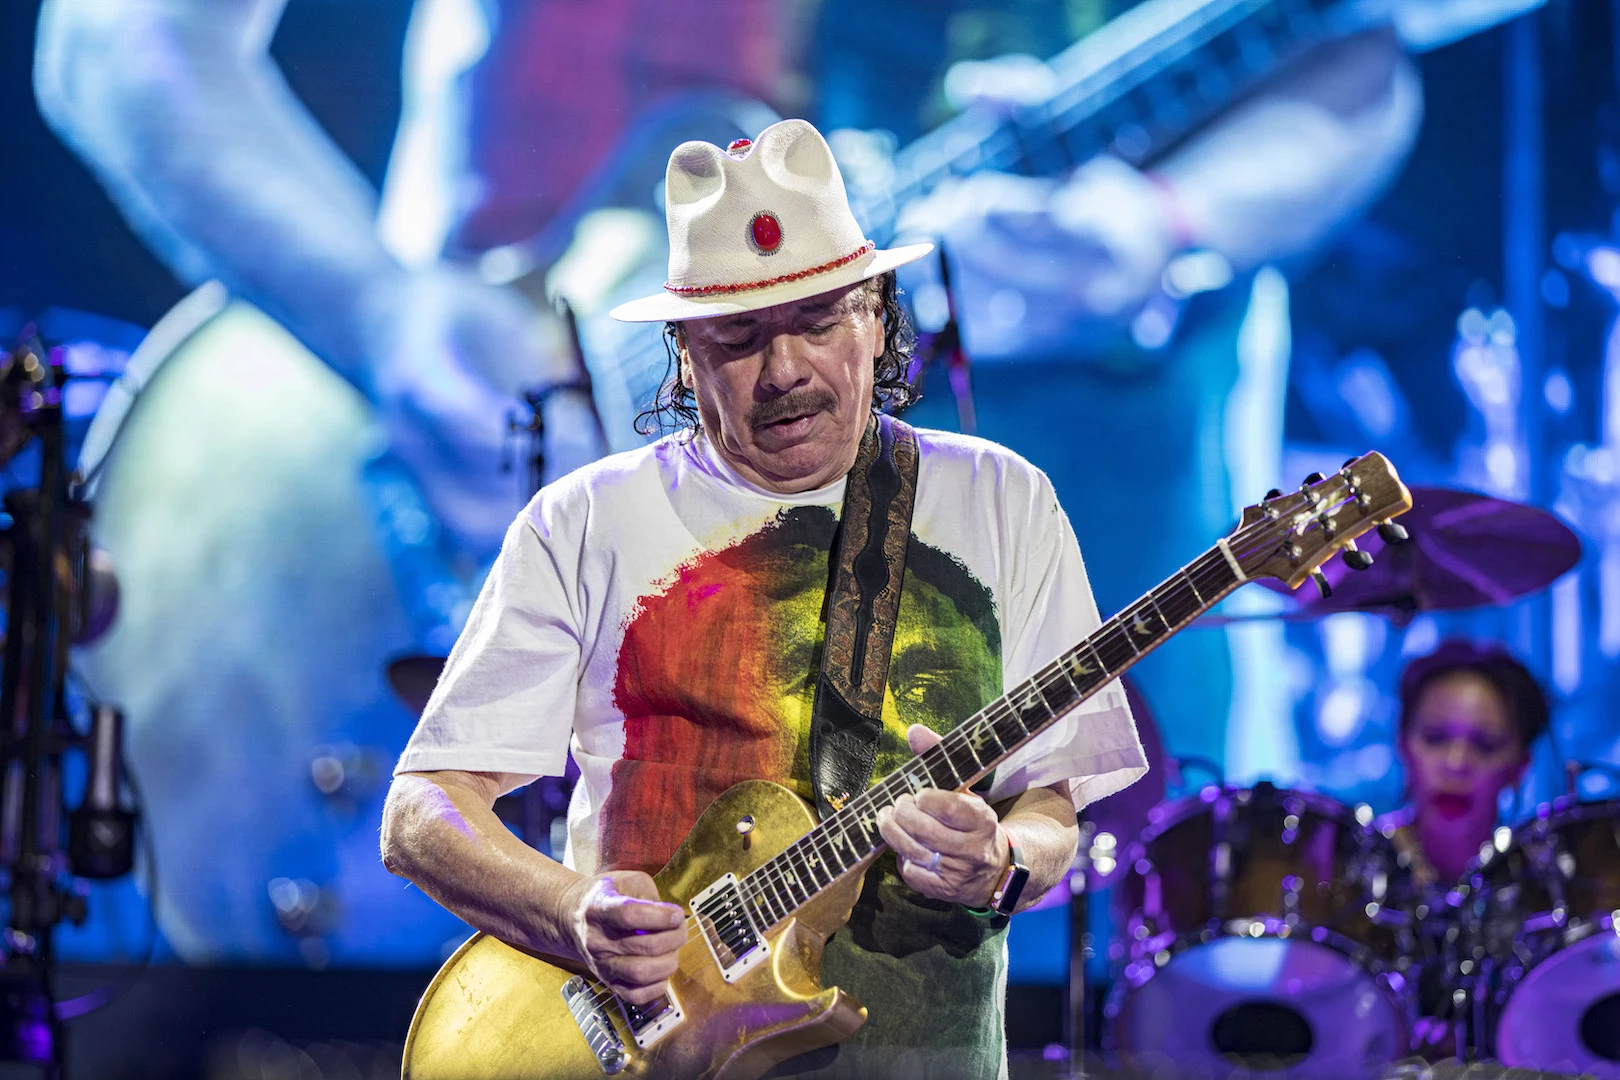 Carlos Santana 'Doing Well' After Collapsing Onstage in Michigan